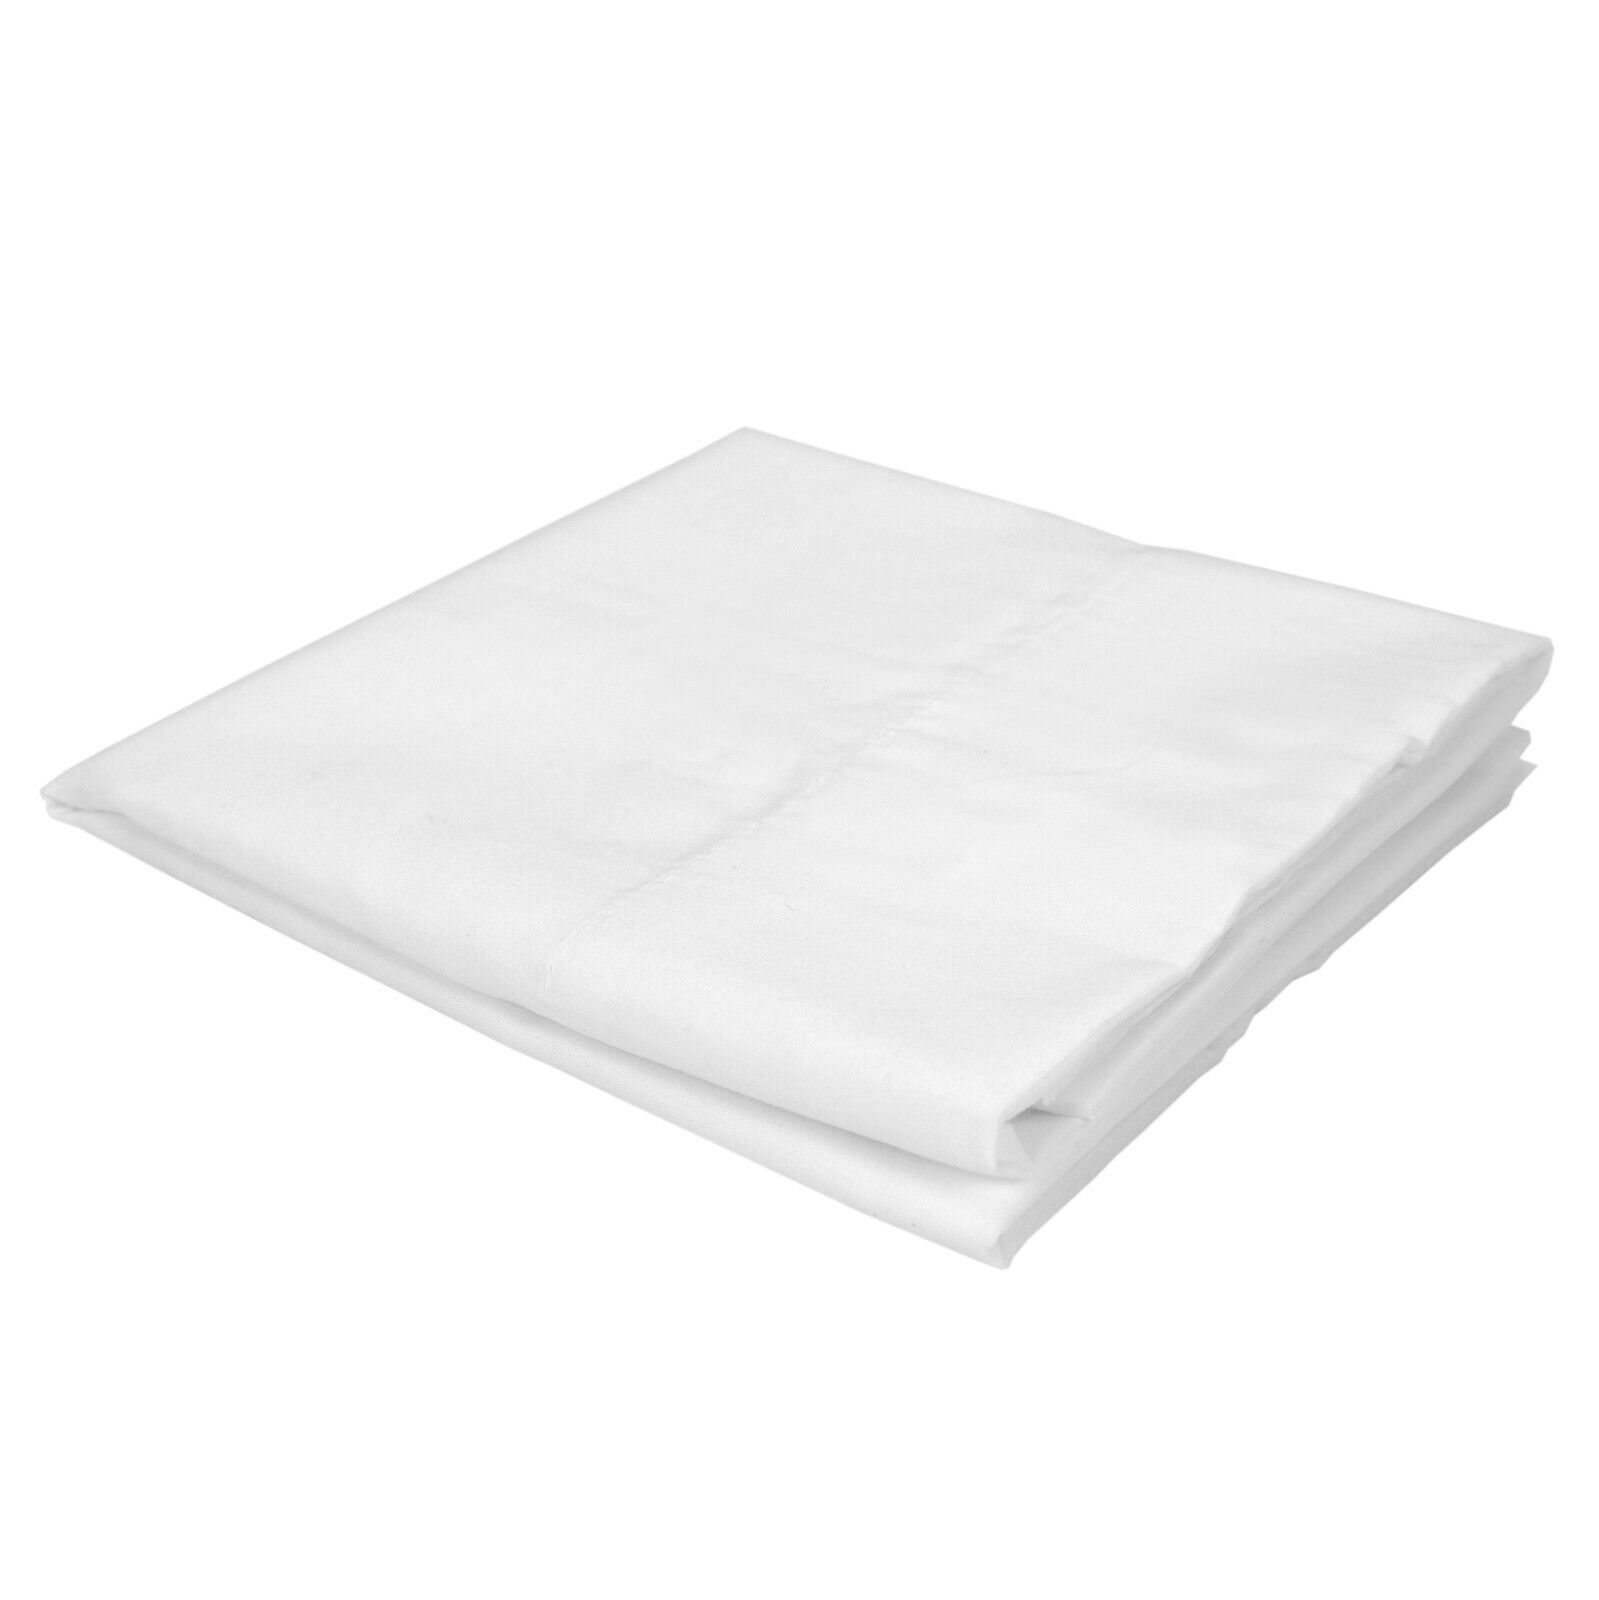 Bulk 12 Pack of Lulworth Pillowcases - Standard Size White 20 x 30 Soft Bedding Arkwright Does Not Apply - фотография #3